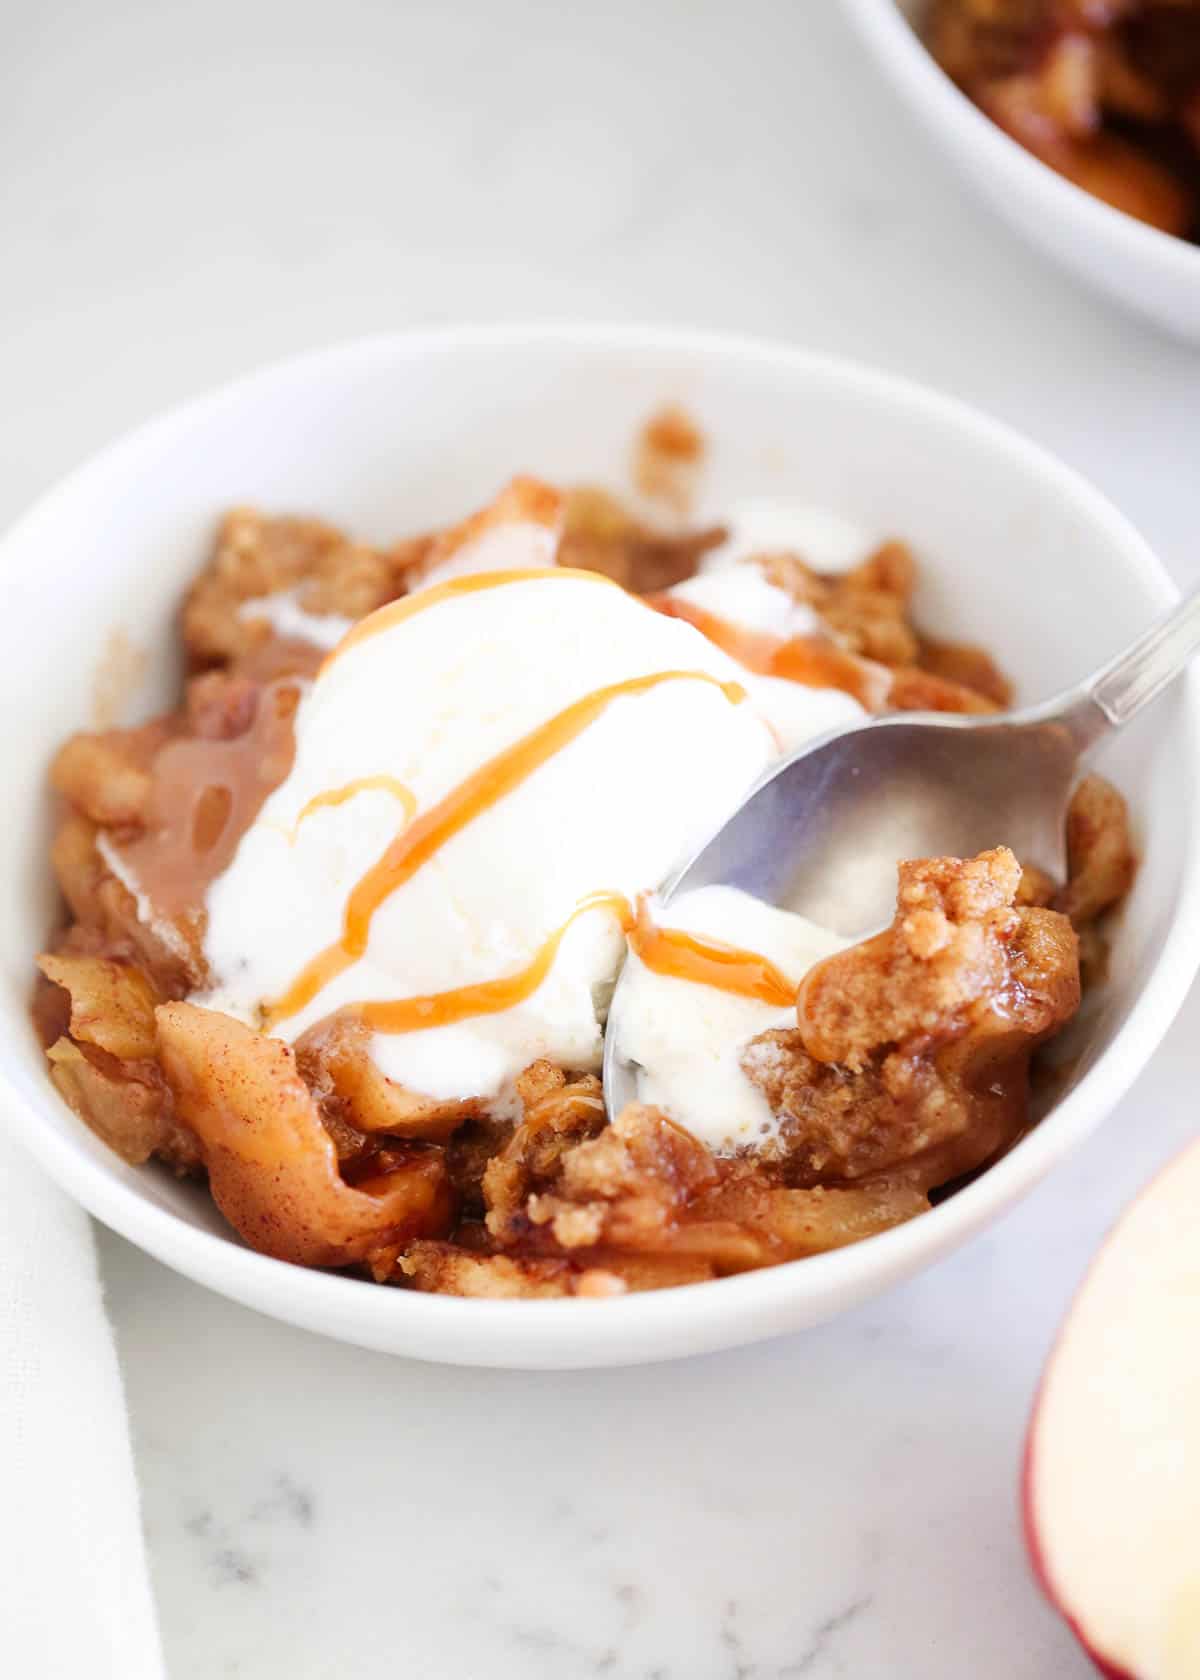 A bowl of apple crumble and ice cream.